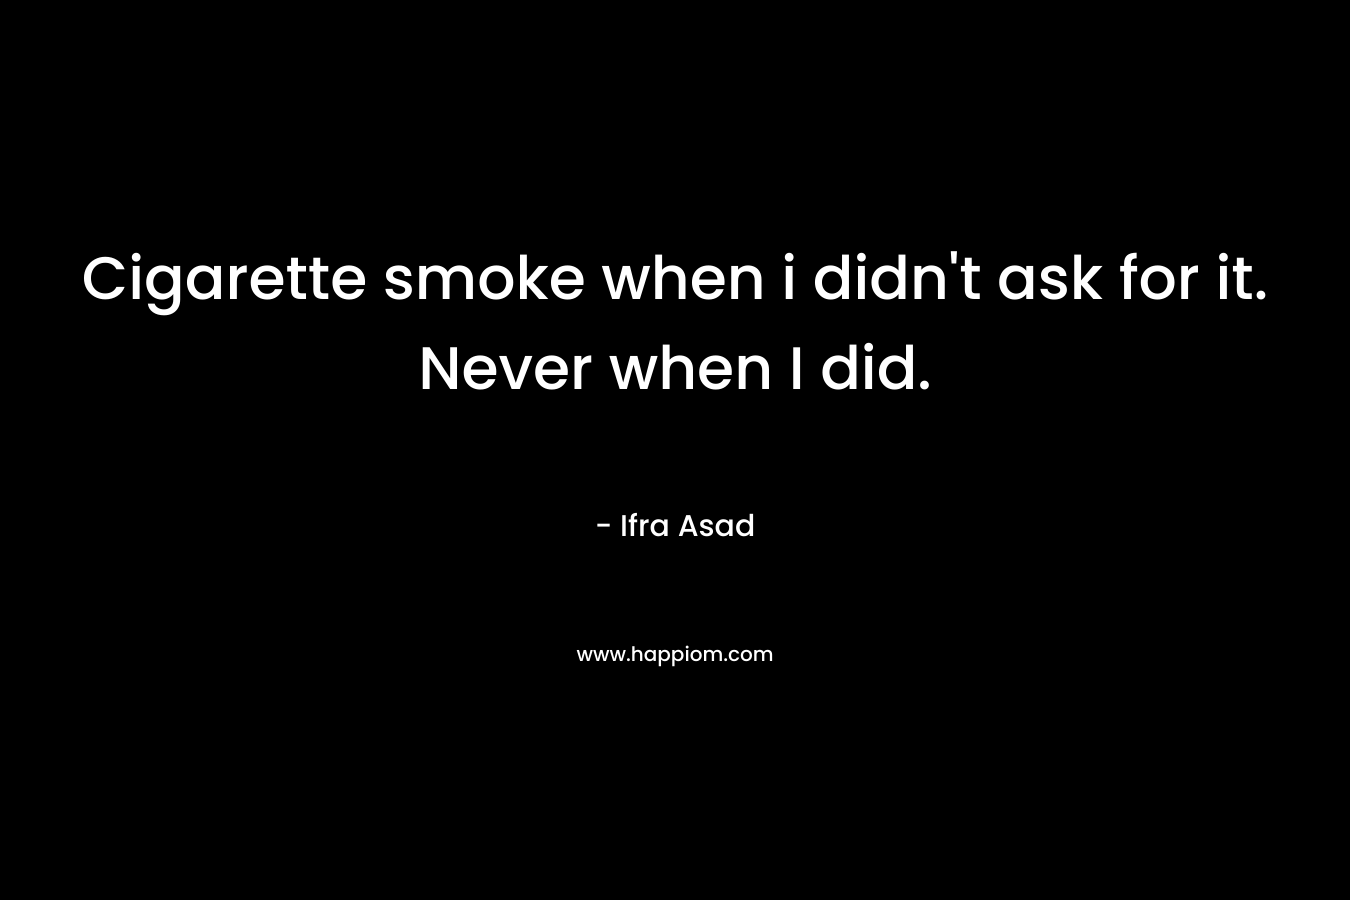 Cigarette smoke when i didn't ask for it. Never when I did.